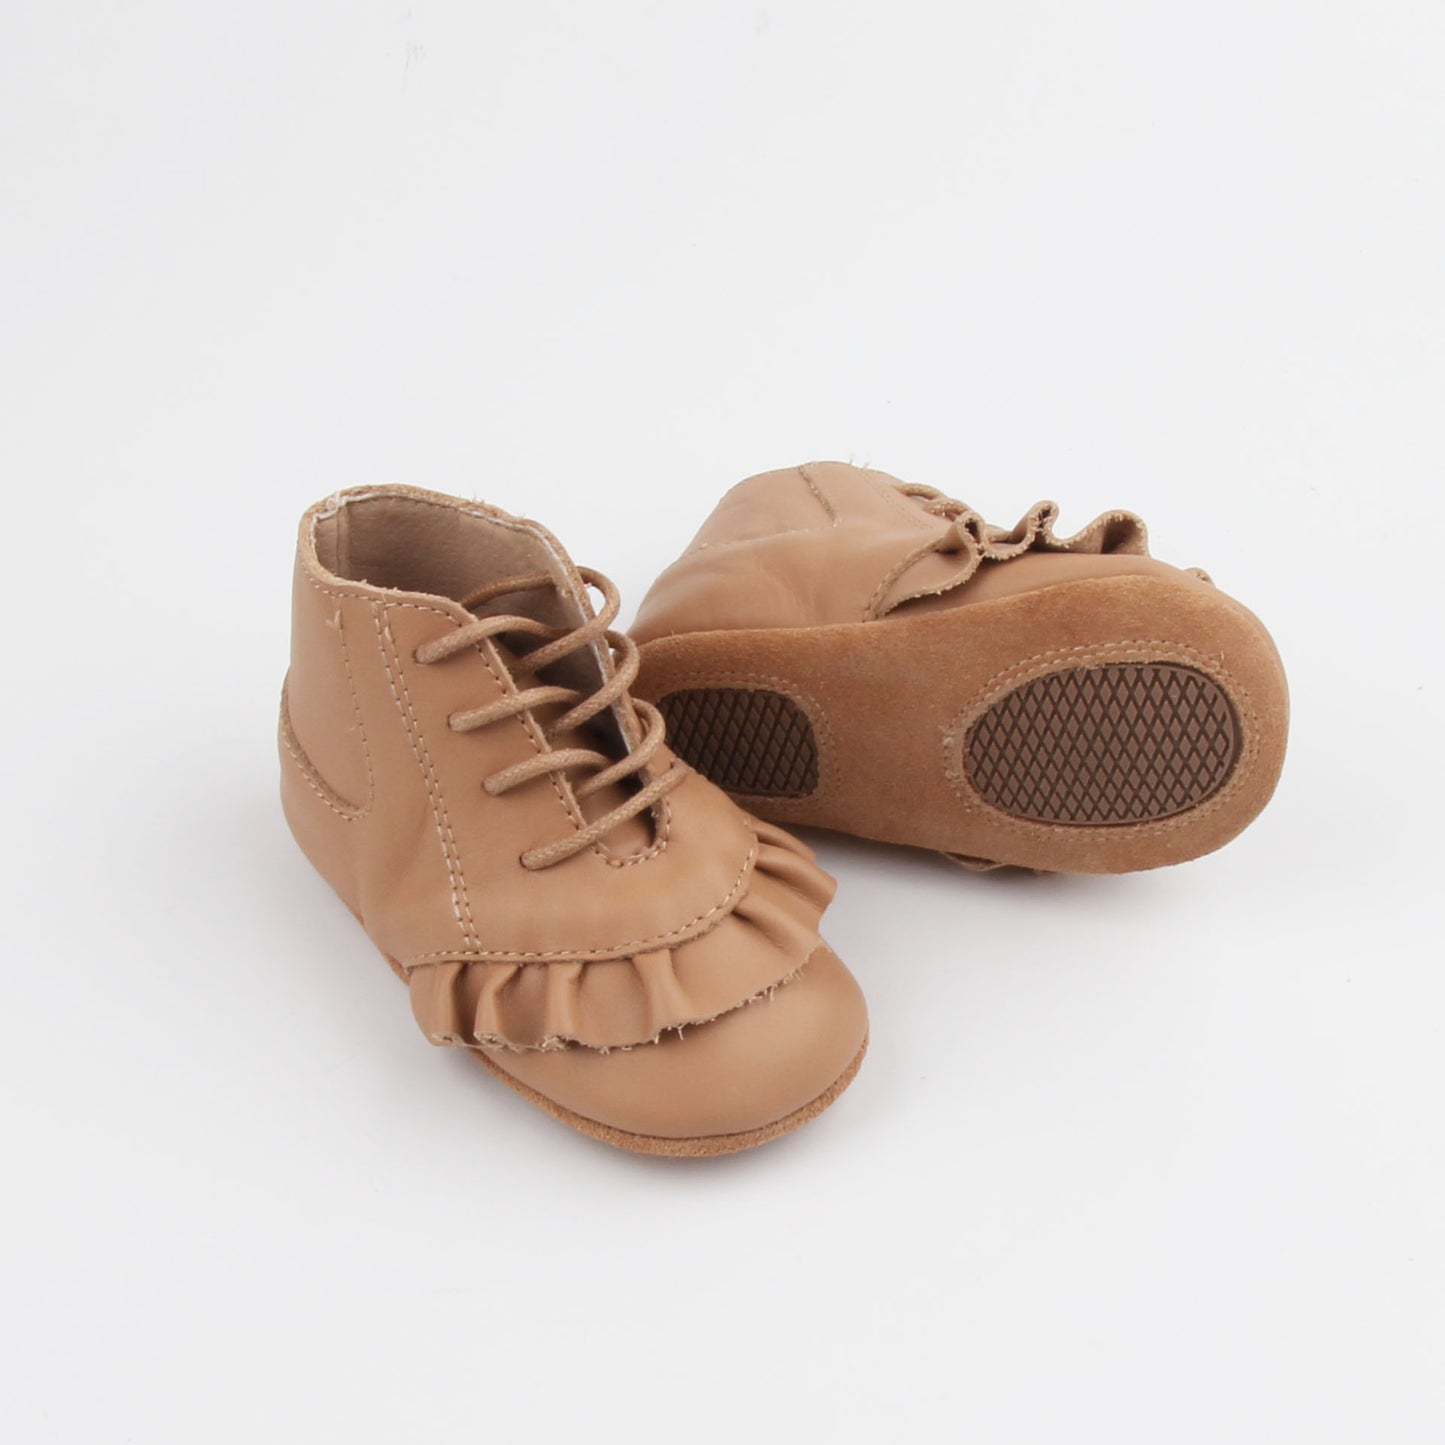 Soft sole baby & toddler boots